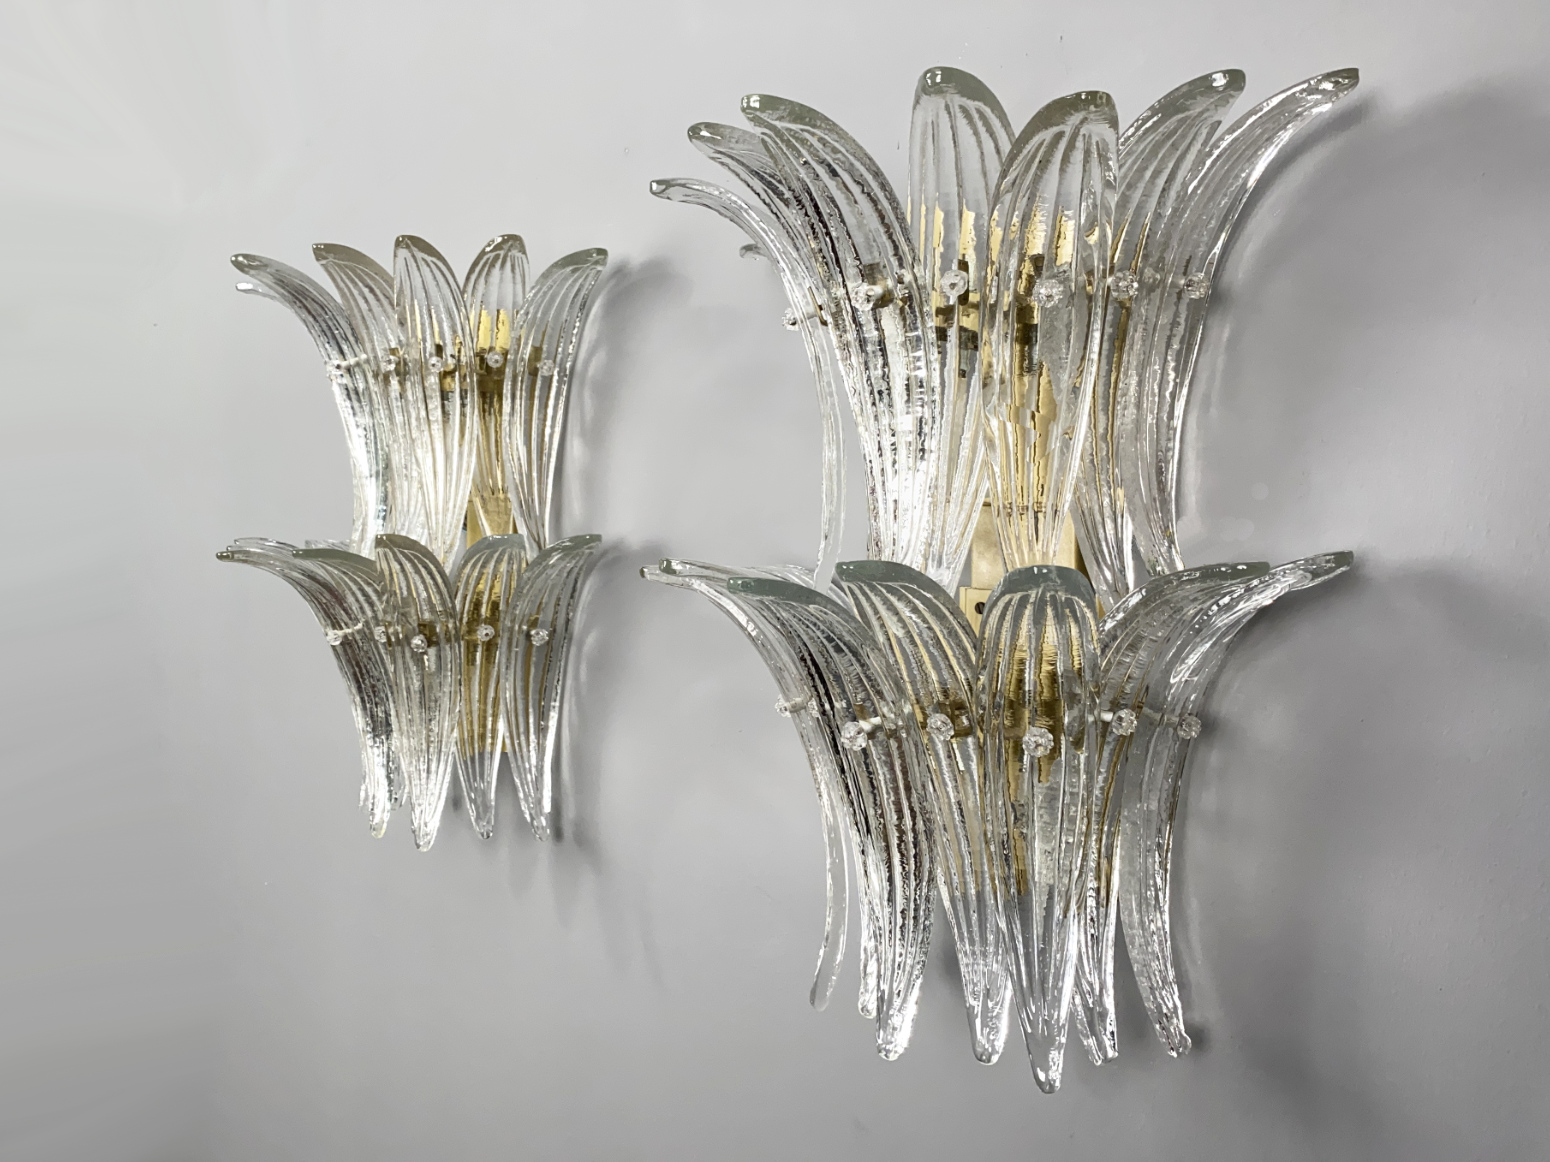 Pair of Palmette Sconces/Wall Lamps by Barovier & Toso, Murano, Italy, 1970s. Each Sconce / Wall Lamp has 18 Murano Glass Palm Leaves by Barovier & Toso